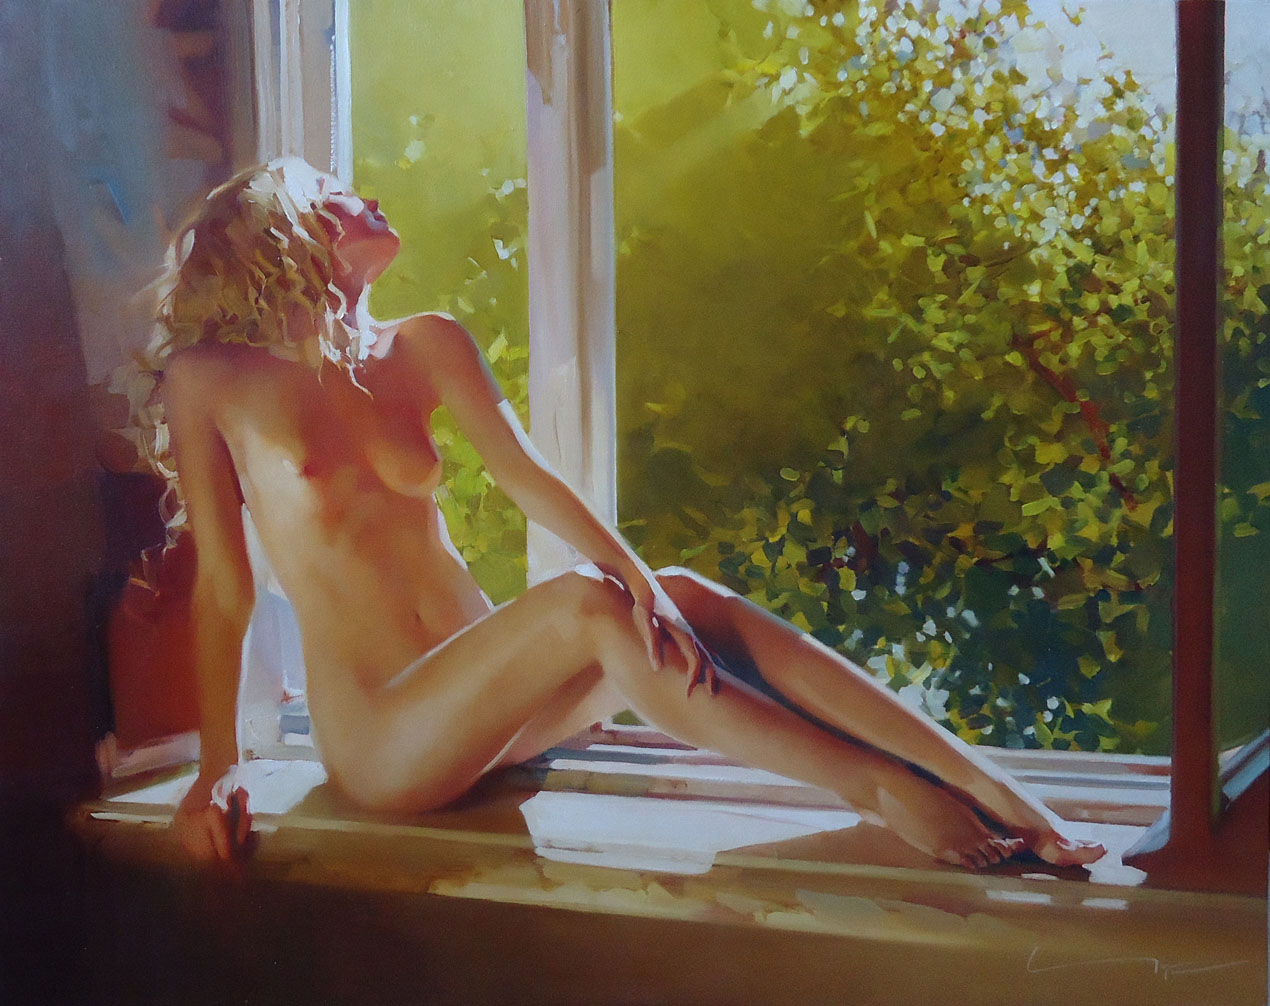 "WINDOW TO THE GARDEN ", oil on canvas 70x90 2013